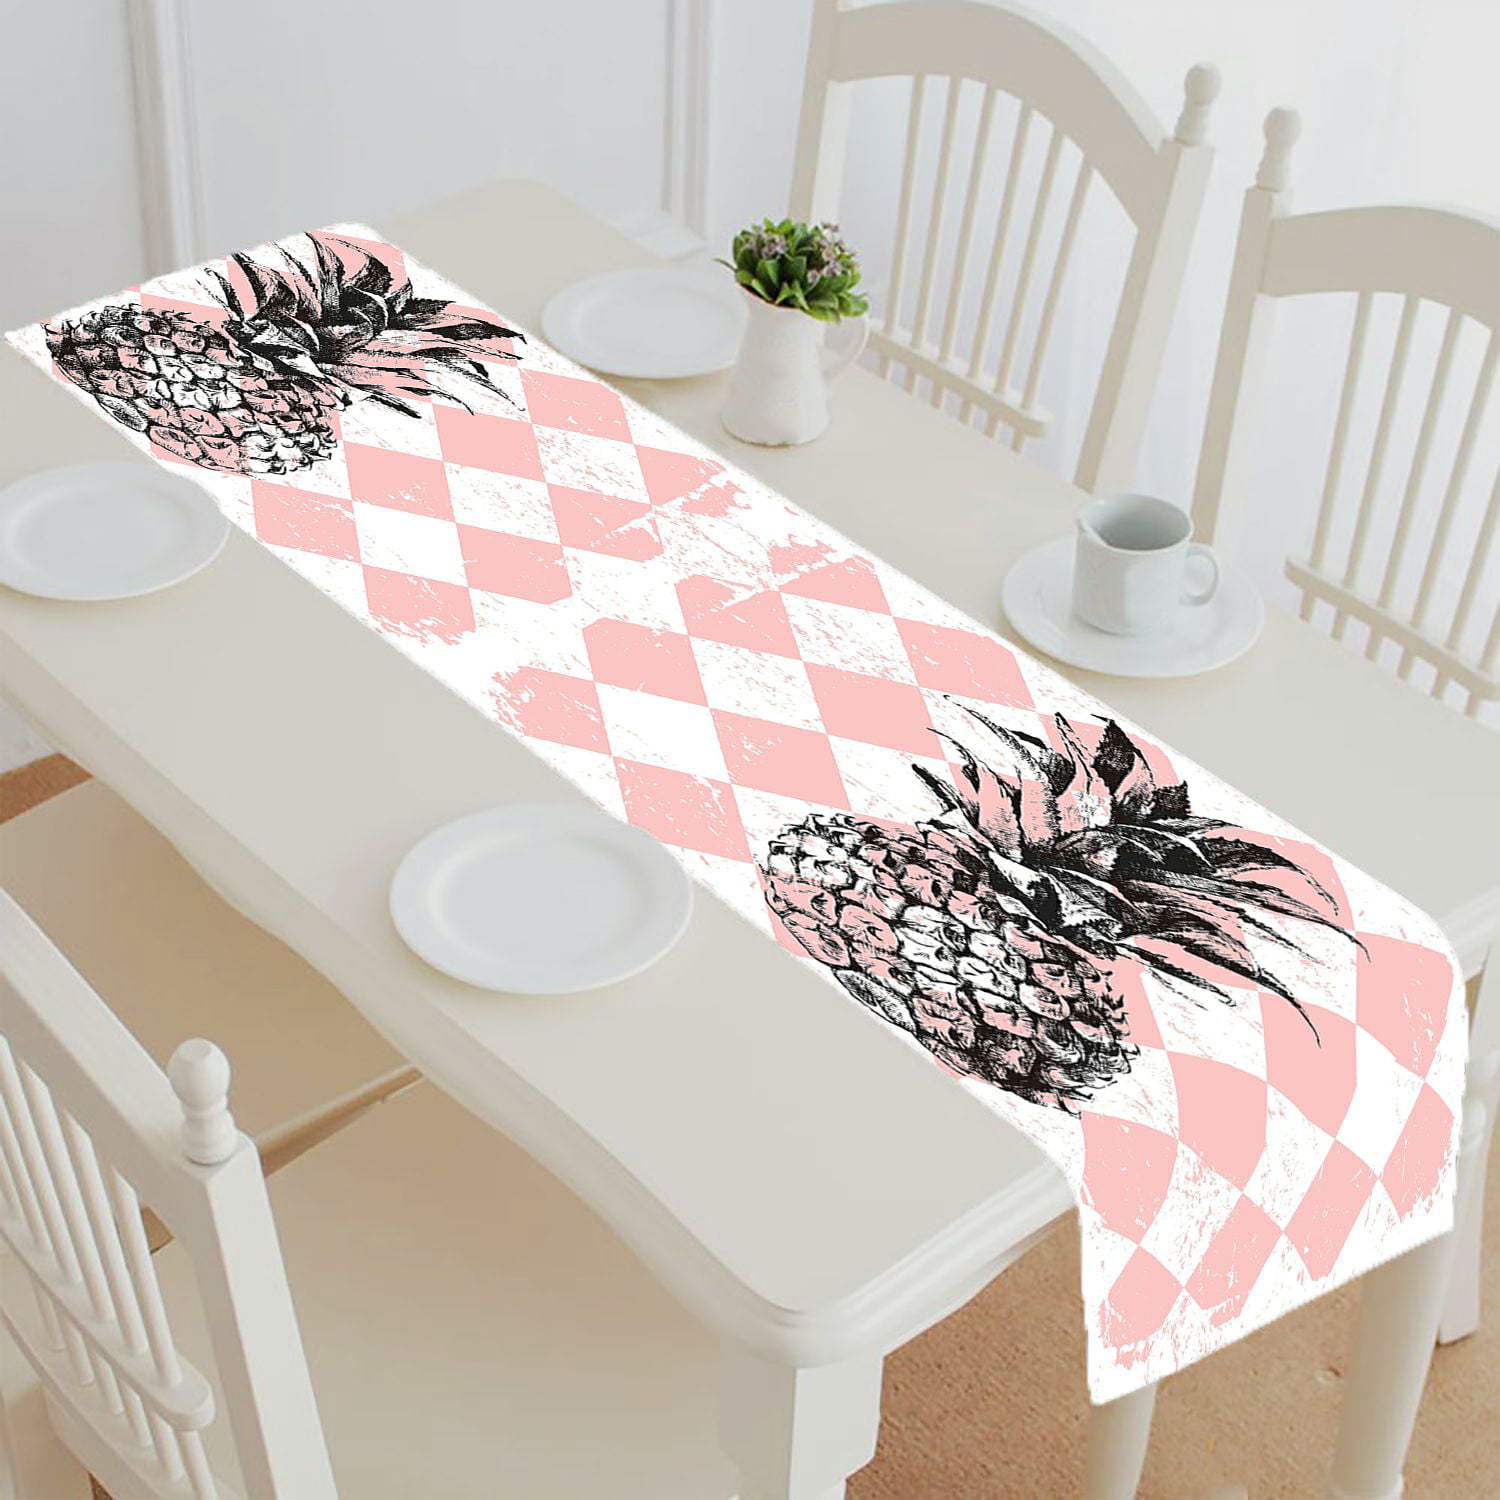 Flamingo Tropical Bird Pink Tie Dye Placemat Table Mats Set of 6 Heat Resistant Stain Washable Kitchen Place Mats Non Slip Vinyl Placemat for Dining Table Decoration